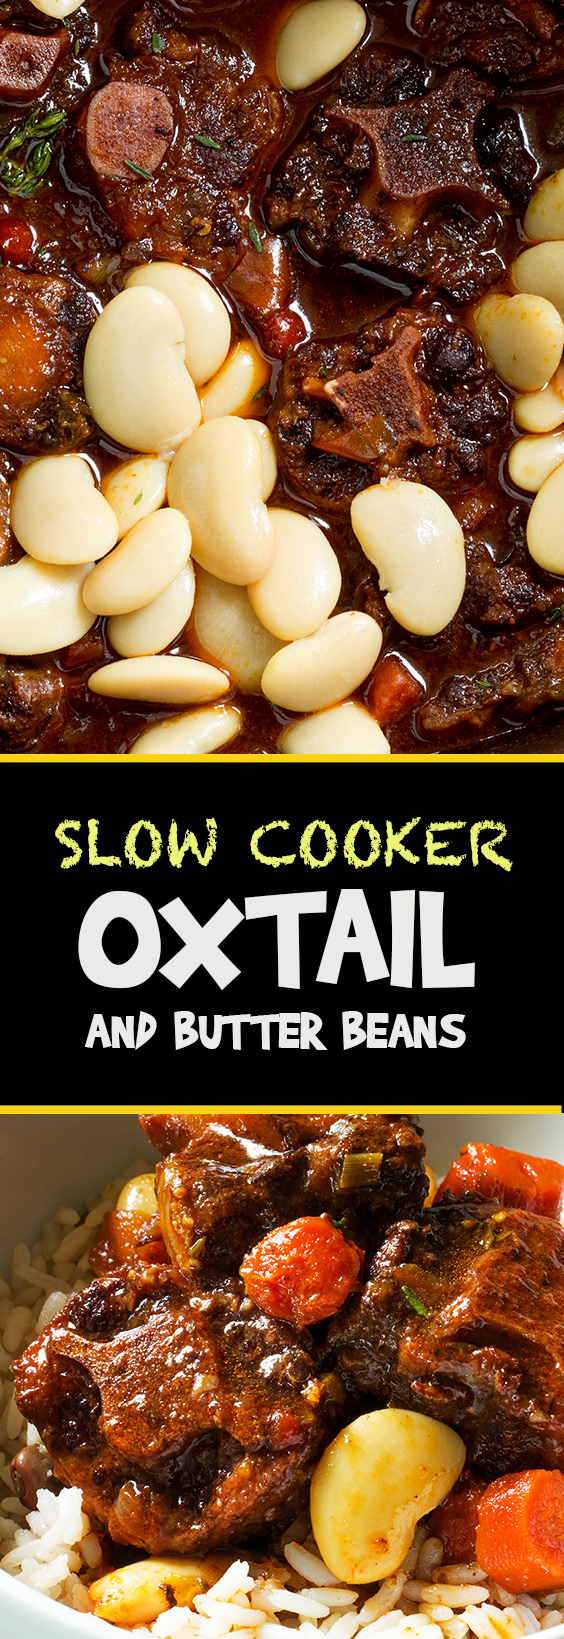 Slow Cooker Oxtail And Butter Beans Cooking Maniac,What Is Aioli Used For